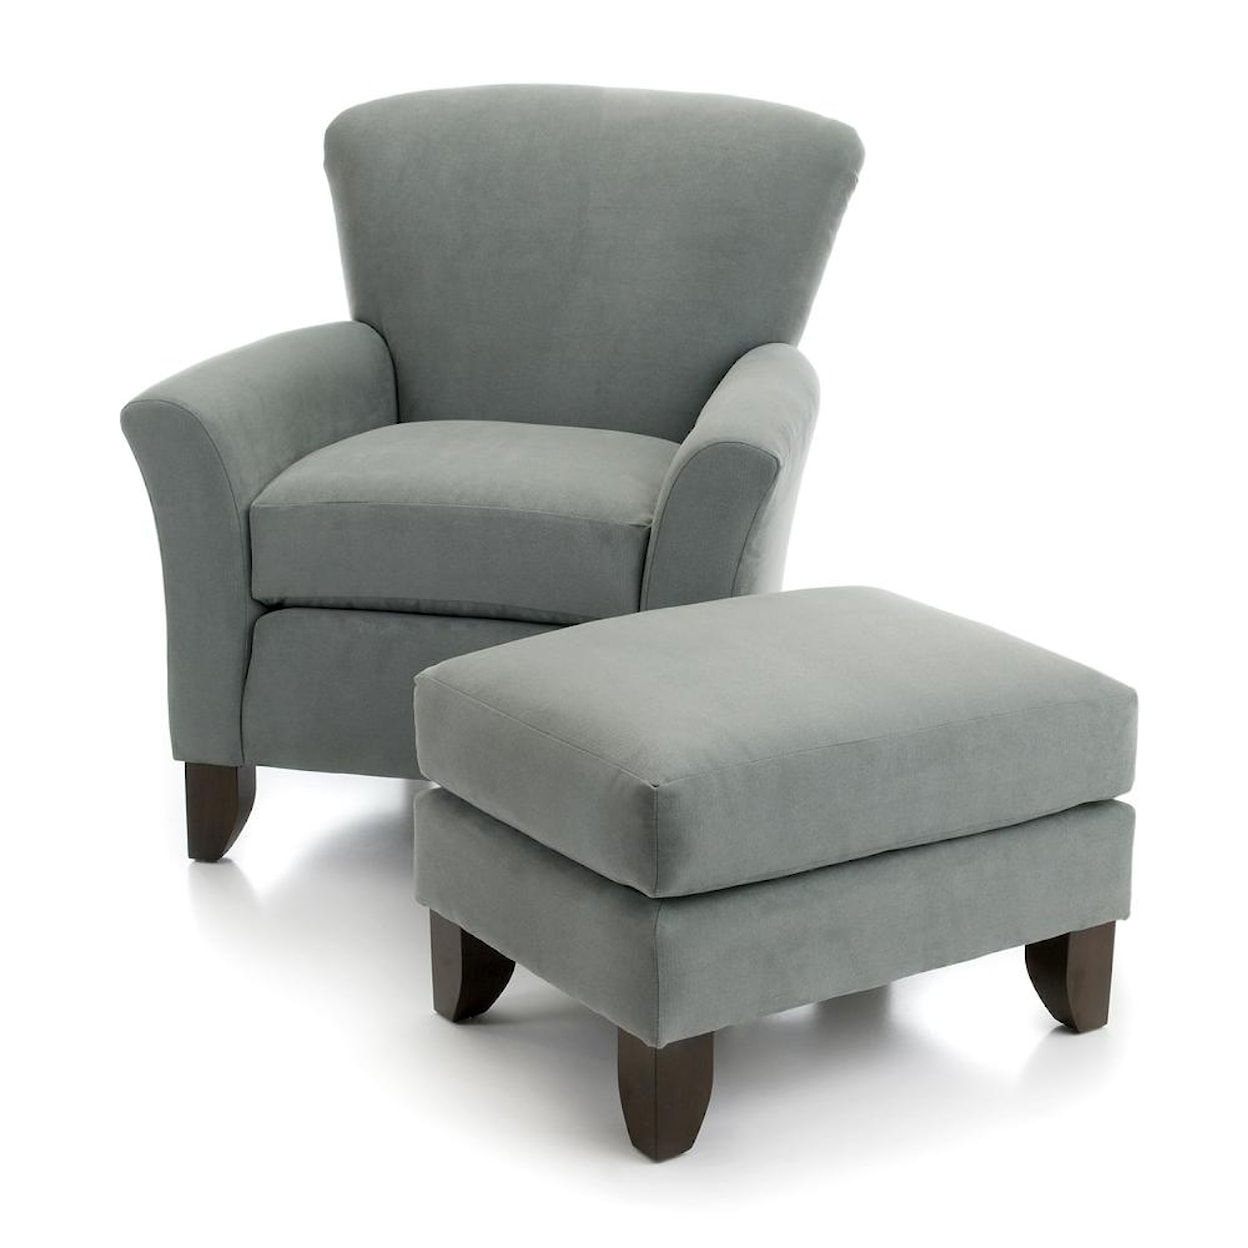 Smith Brothers 919 Upholstered Chair & Ottoman